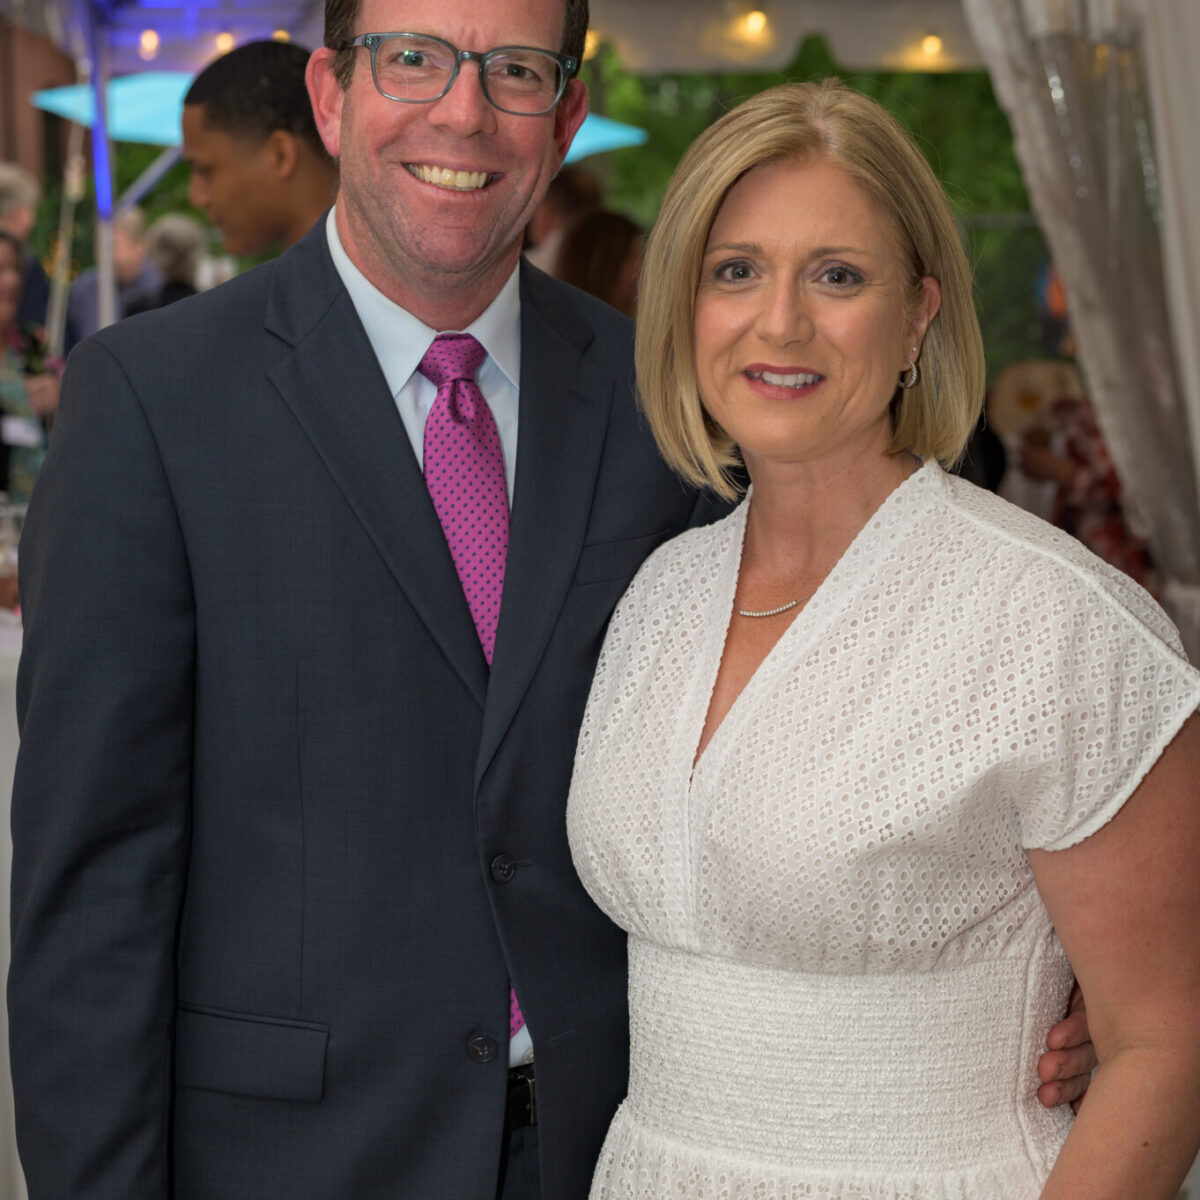 Cortney Nicolato, United Way of Rhode Island’s president and CEO, poses with her husband, David.